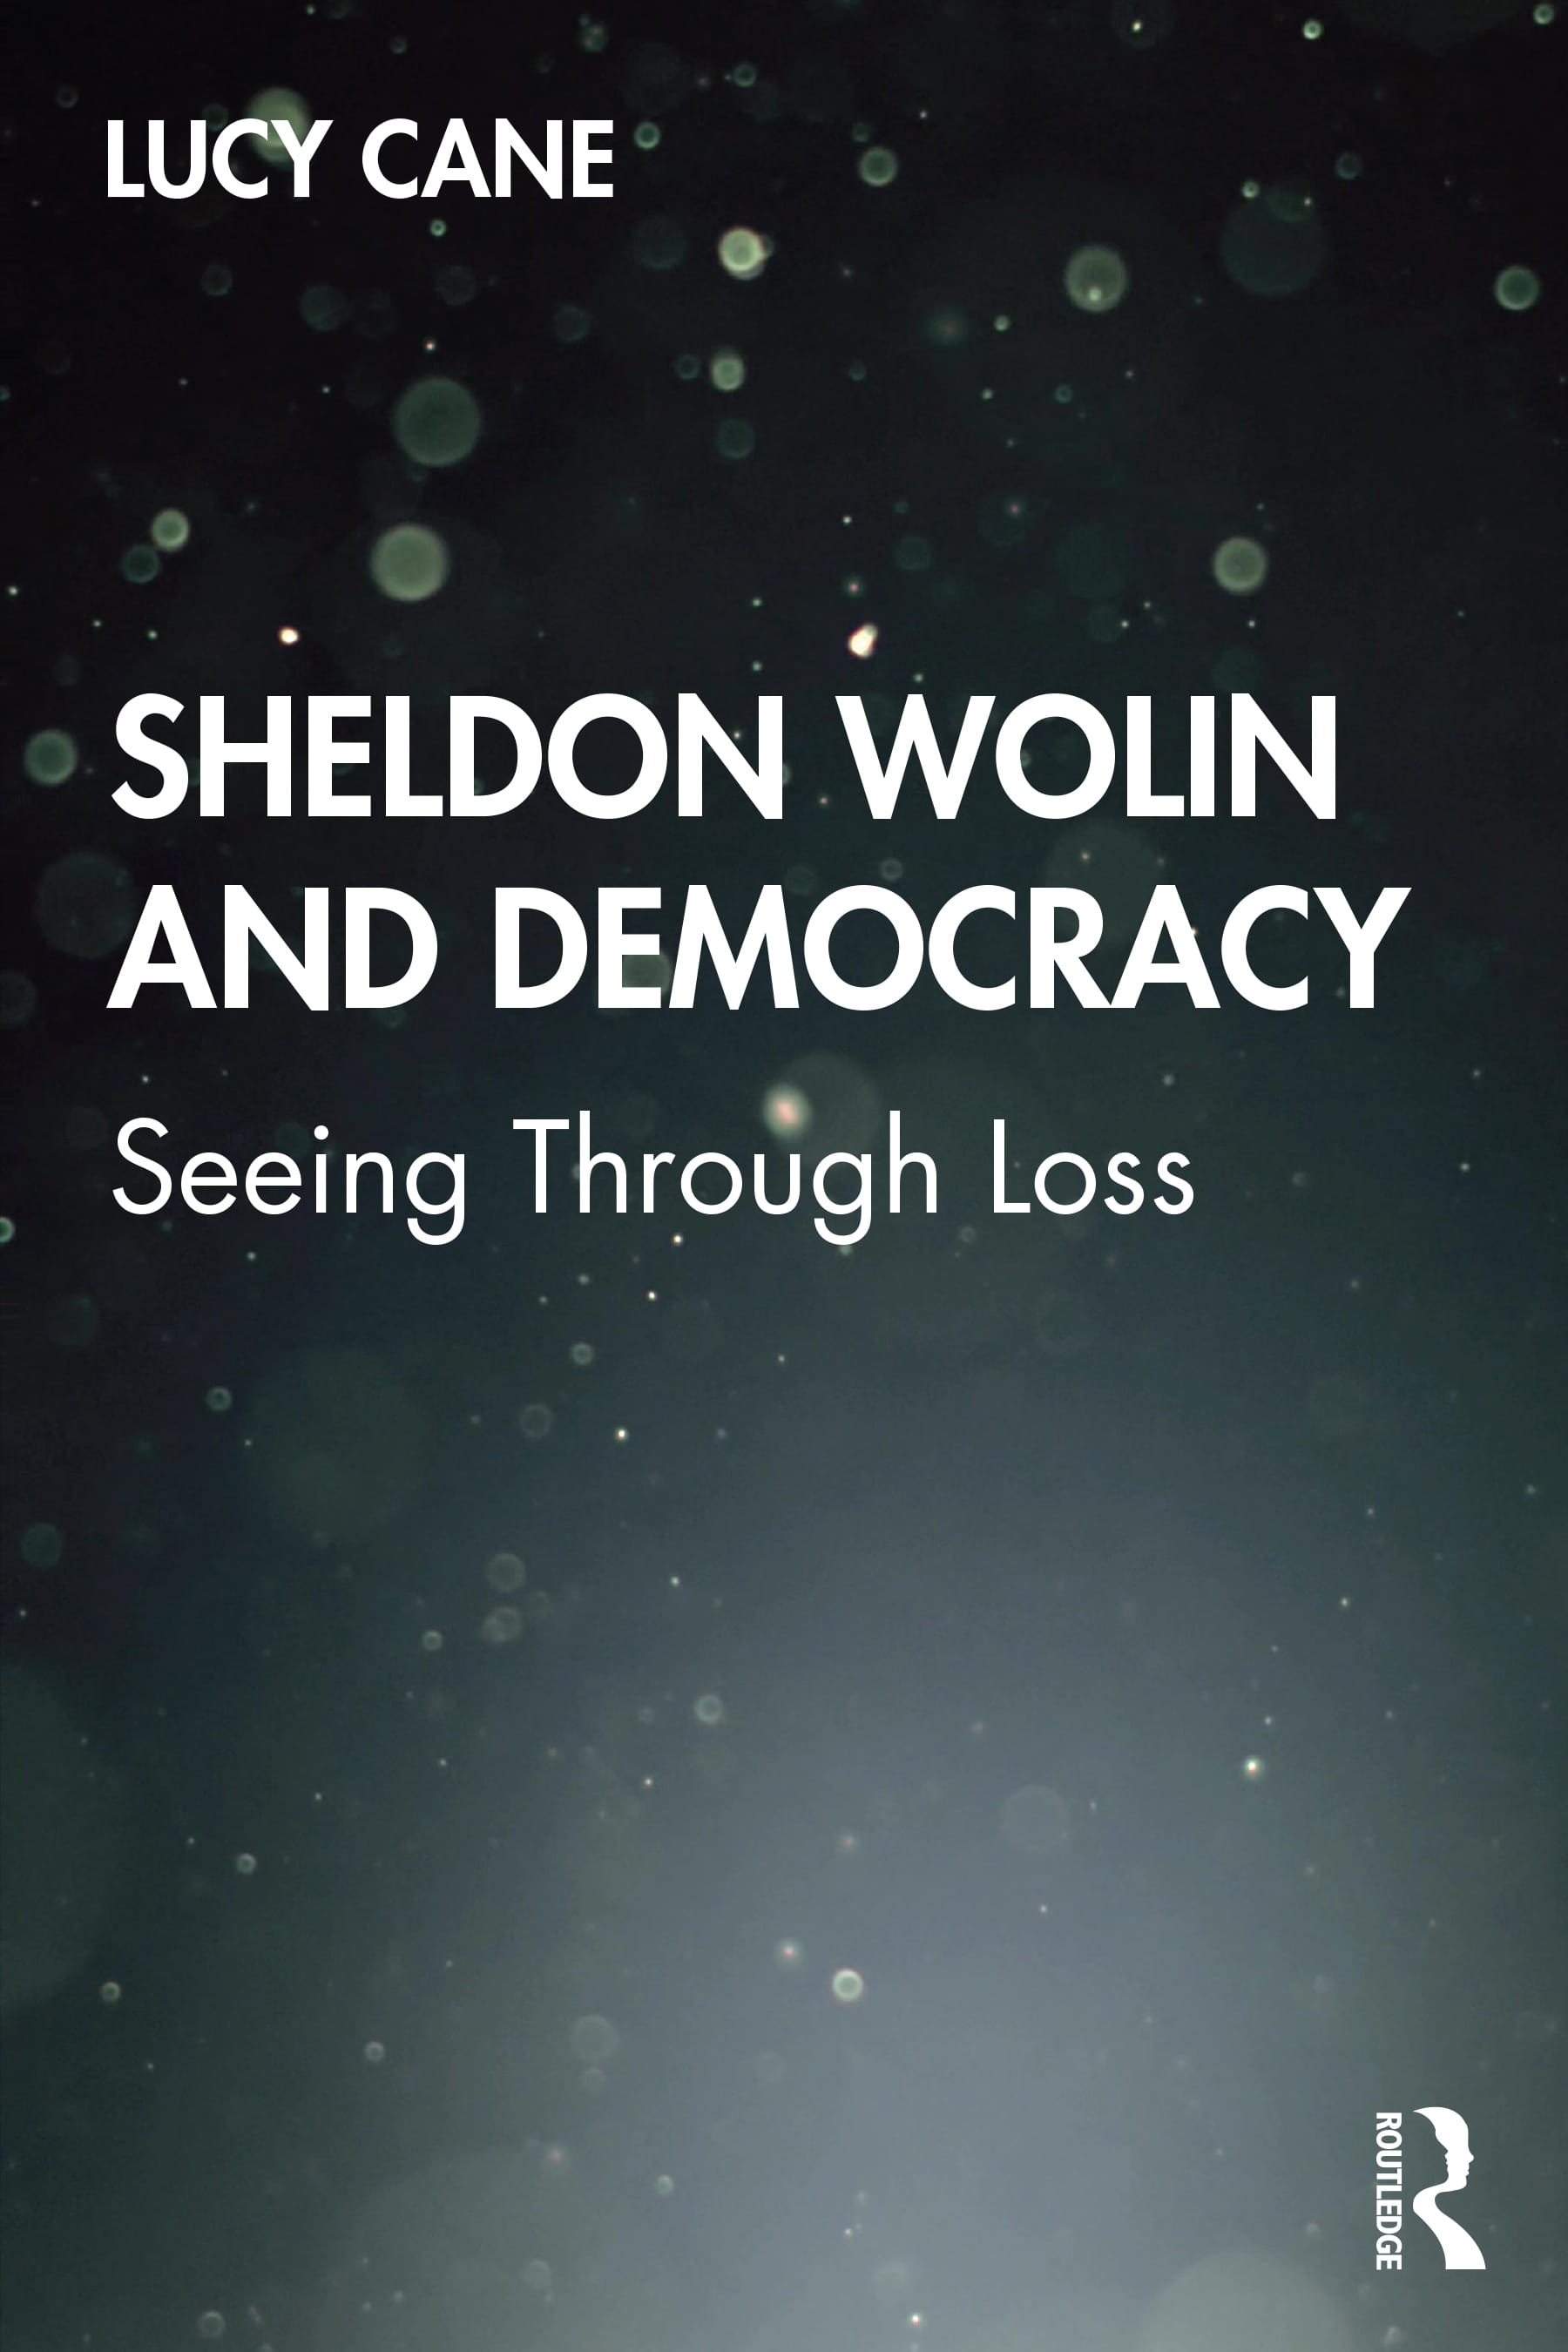 Sheldon Wolin and Democracy: Seeing Through Loss